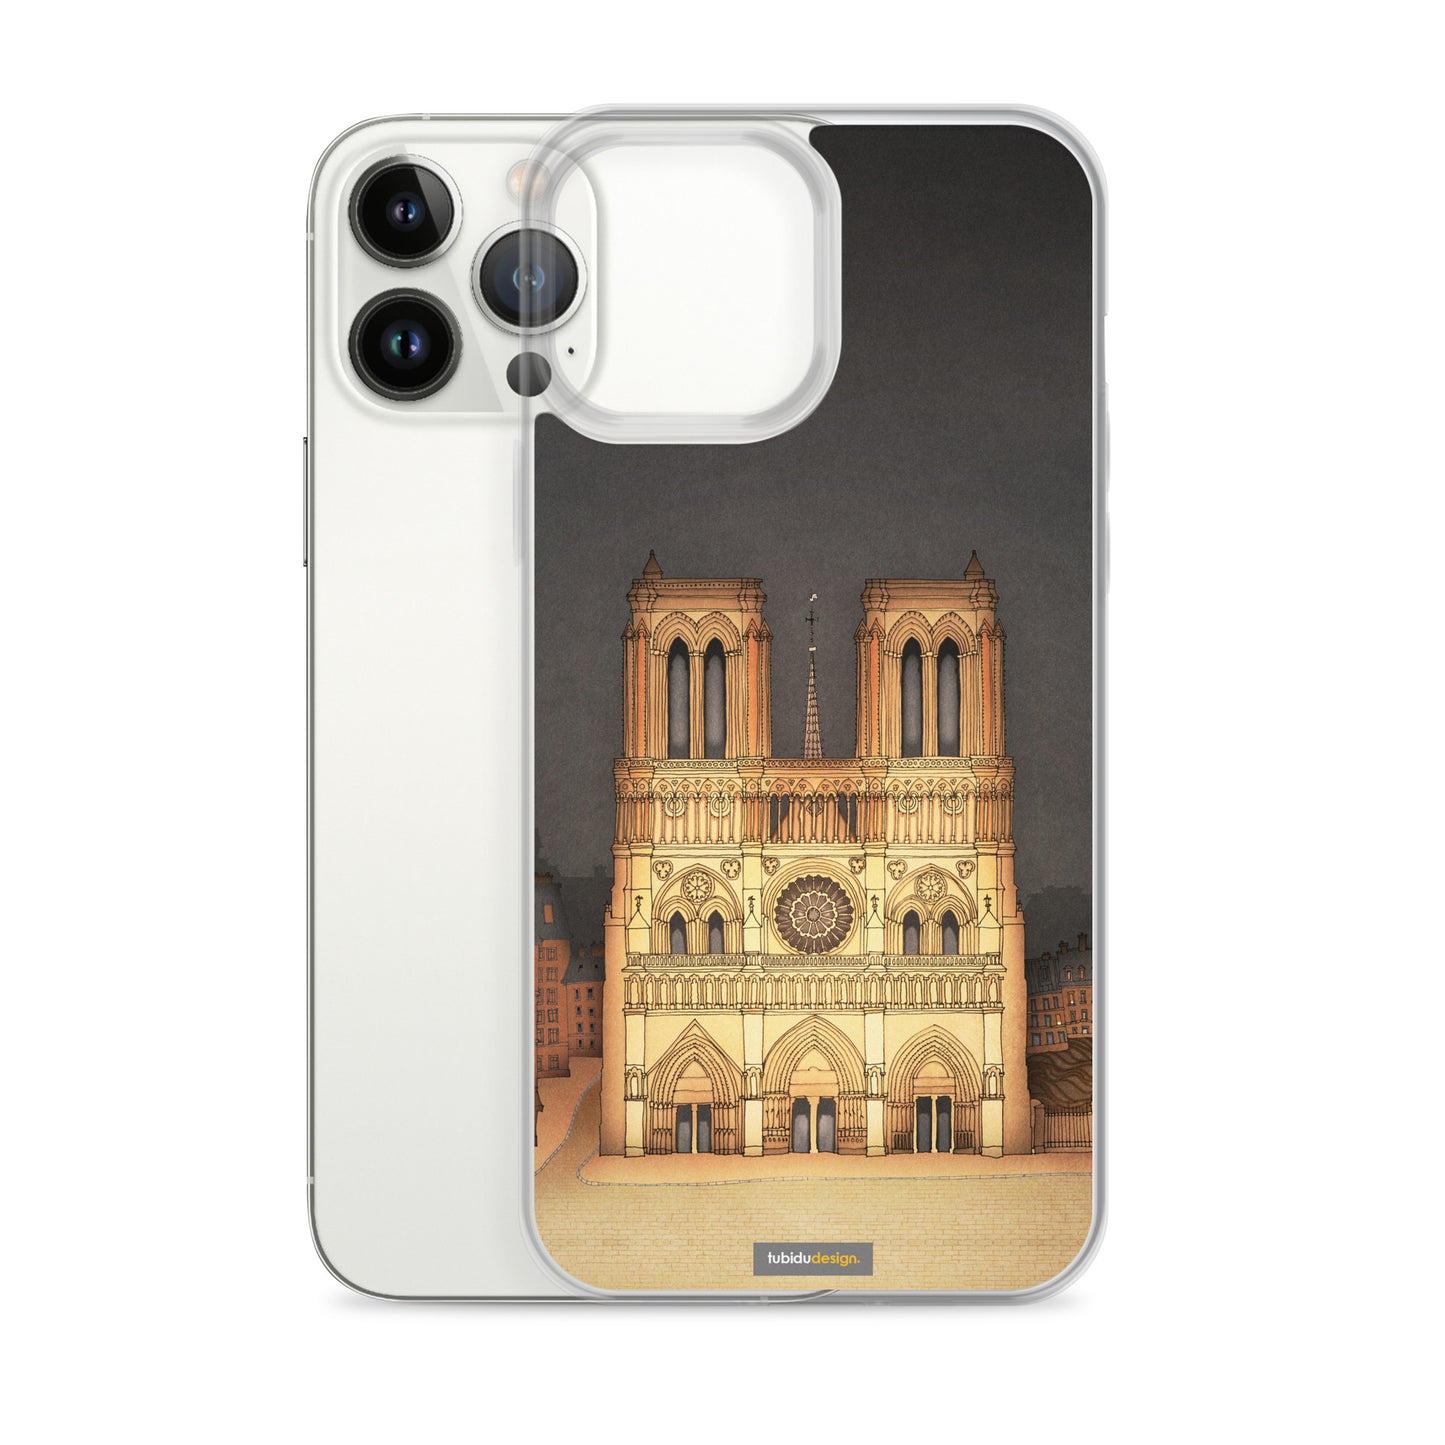 The Notre Dame in Paris - Illustrated iPhone Case